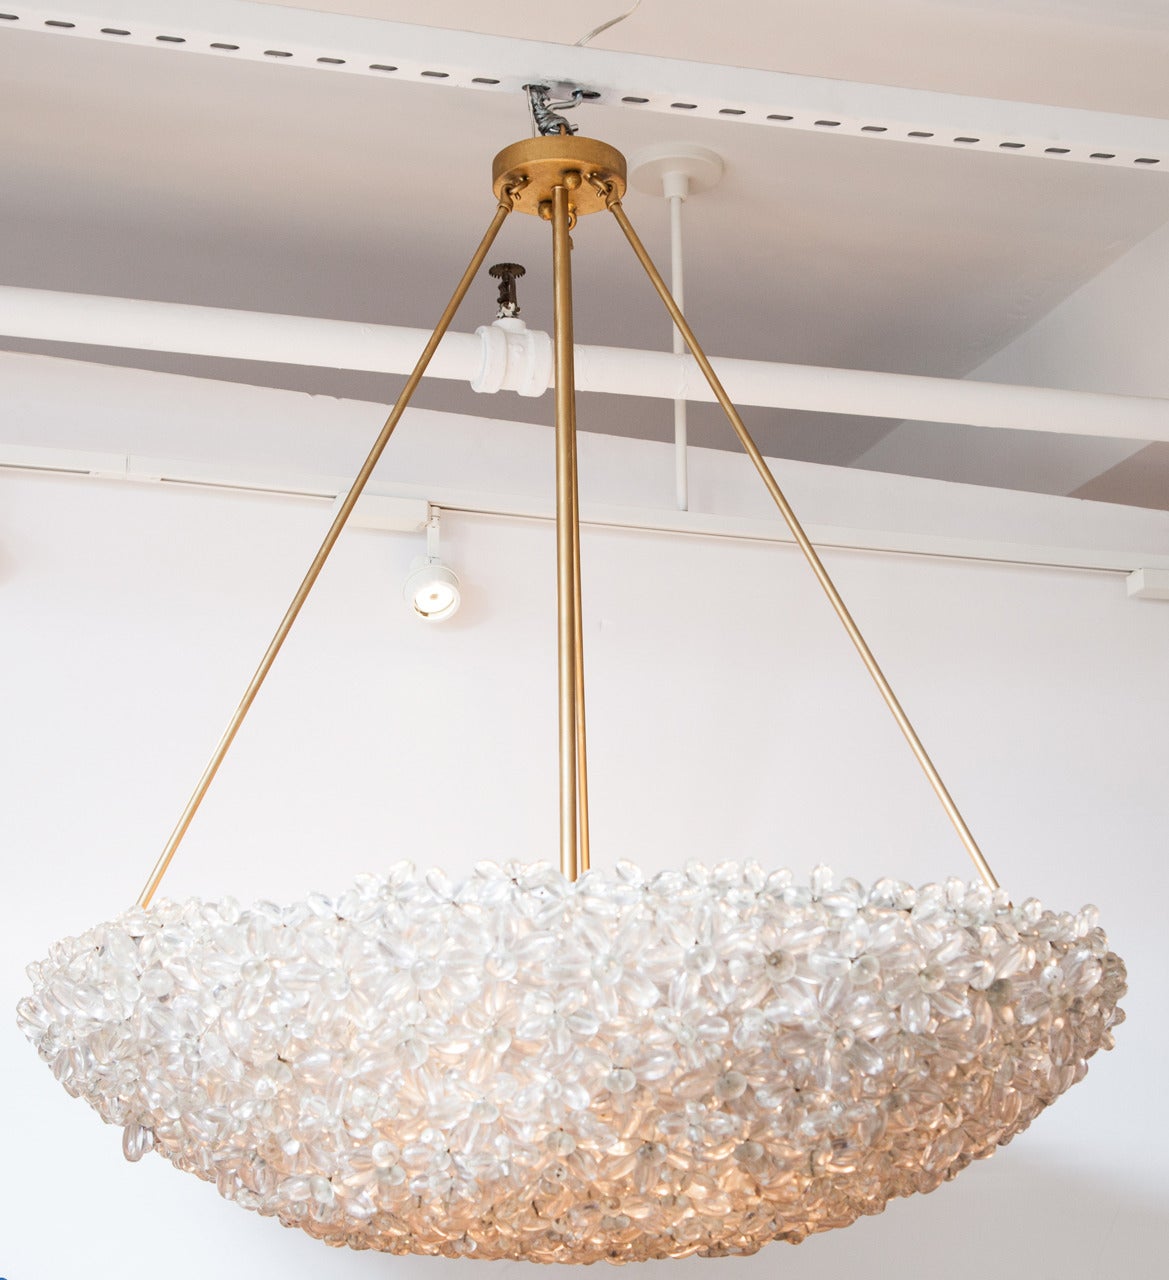 This stunning piece is made up of Lucite daisies that are joined together, creating a lovely half-moon bouquet with light passing through it. This unique piece is hung from three brass rods and can be a focal point for any room.